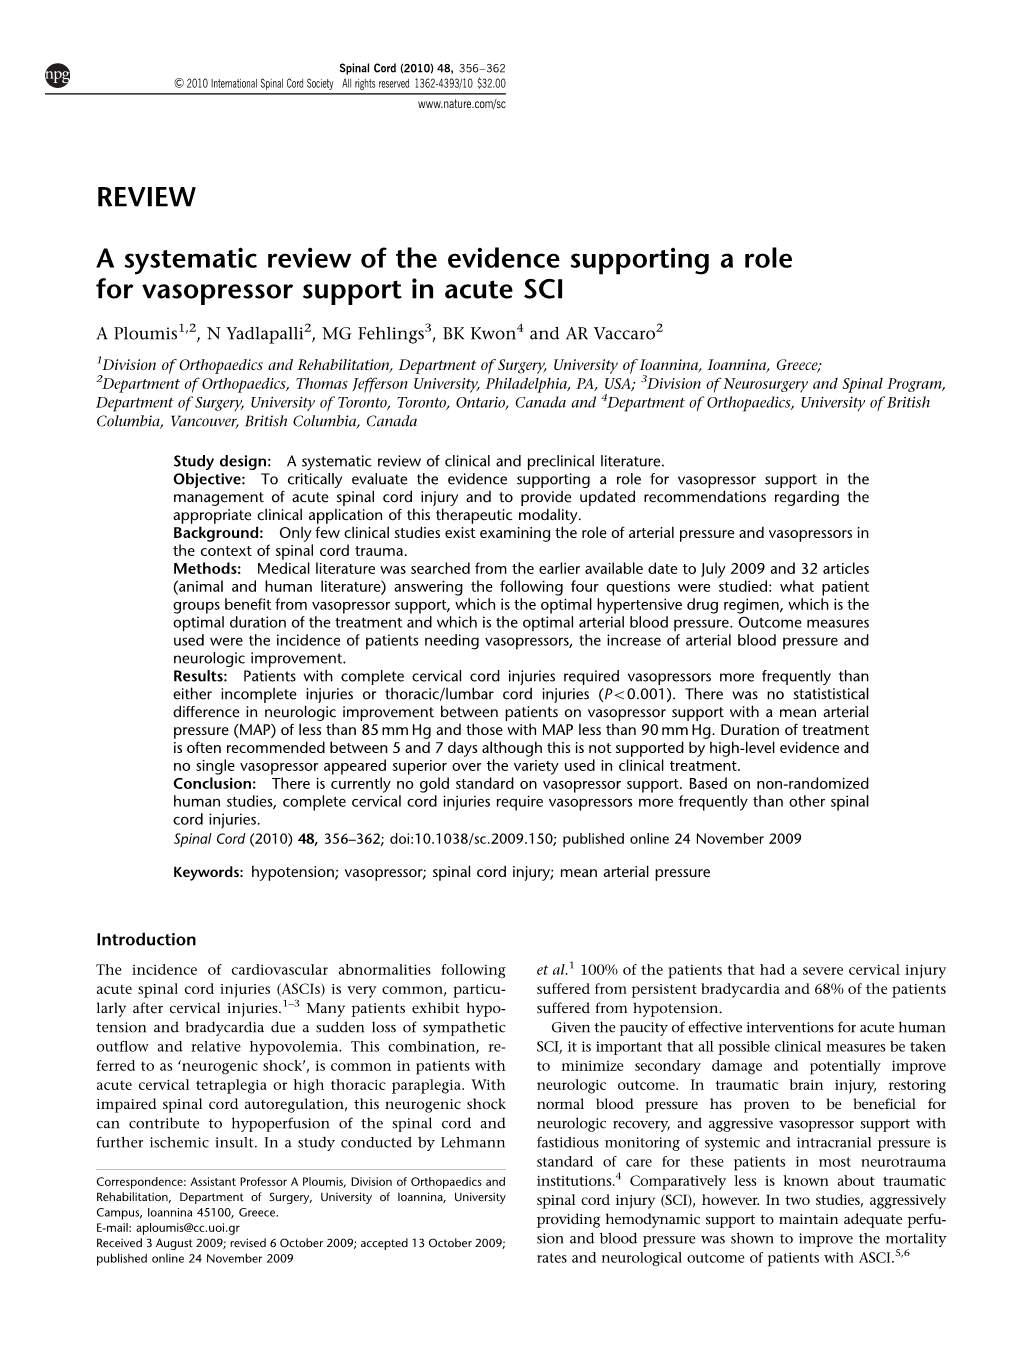 A Systematic Review of the Evidence Supporting a Role for Vasopressor Support in Acute SCI